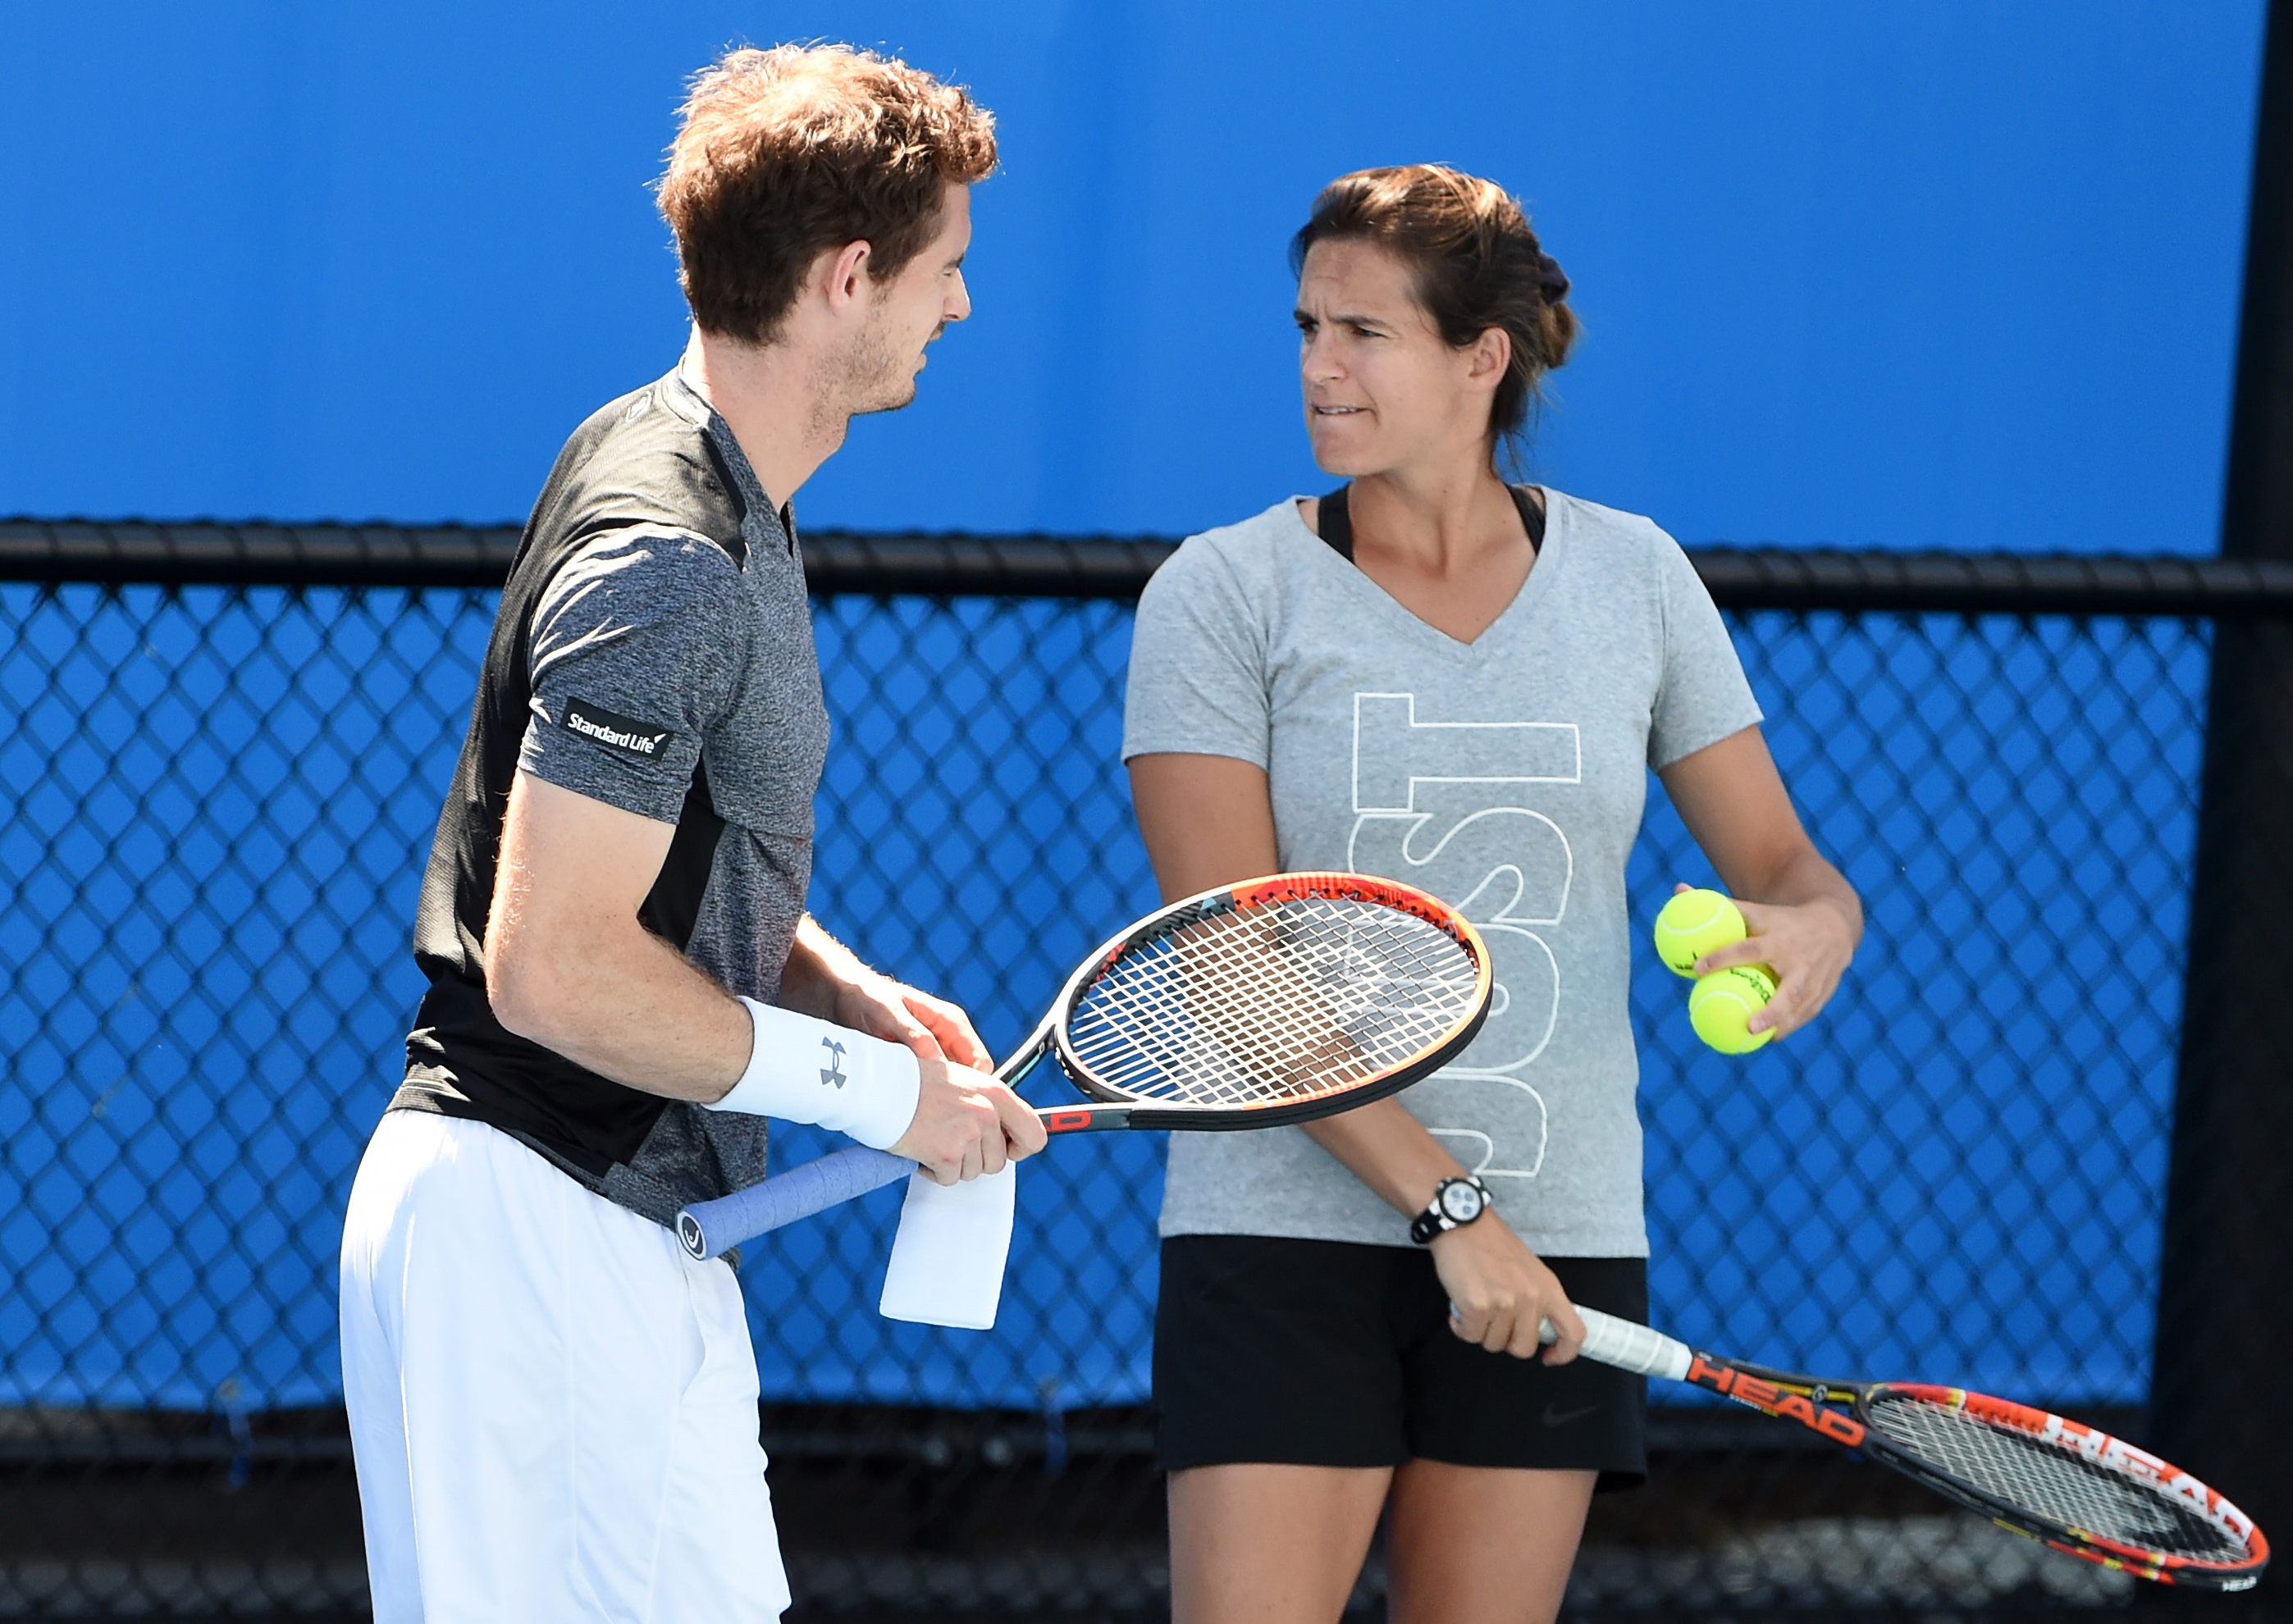 Britain's Andy Murray (L) walks with his coach Amelie Mauresmo during a training session on day seven of the 2016 Australian Open tennis tournament in Melbourne on January 24, 2016. (William West—AFP/Getty Images)